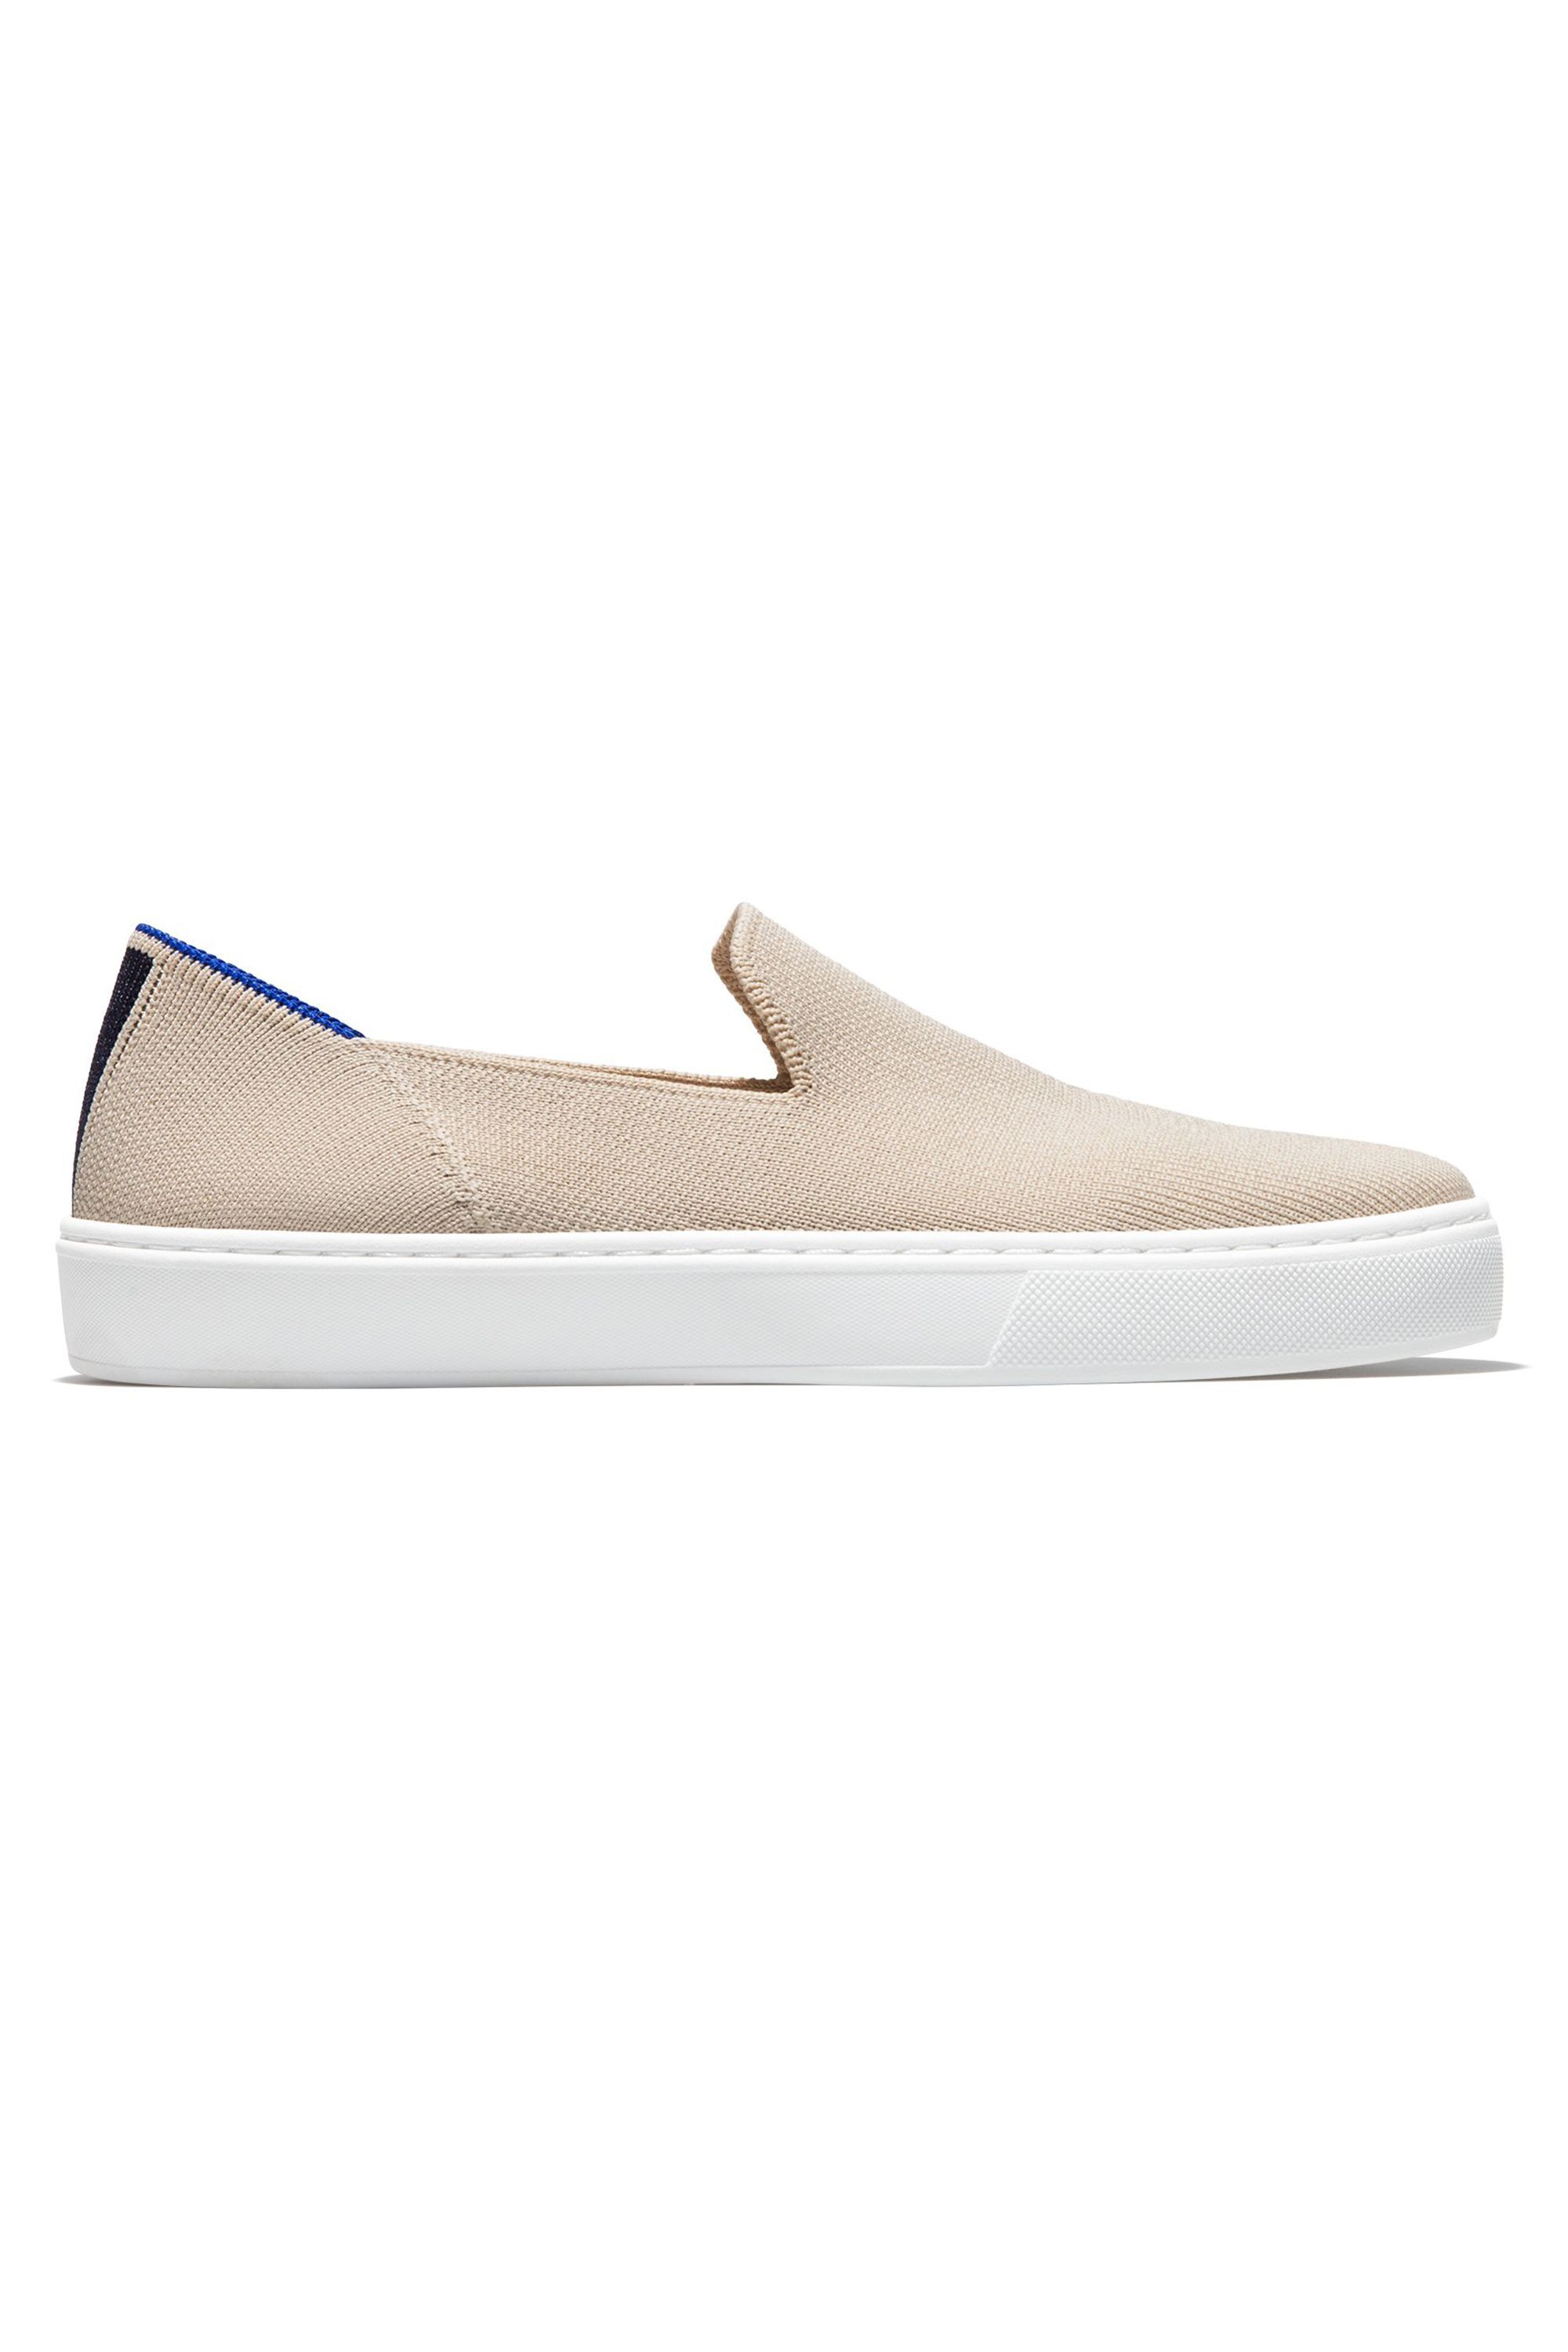 Buy Woodland Slip-On Sneakers for Men Online | FASHIOLA INDIA